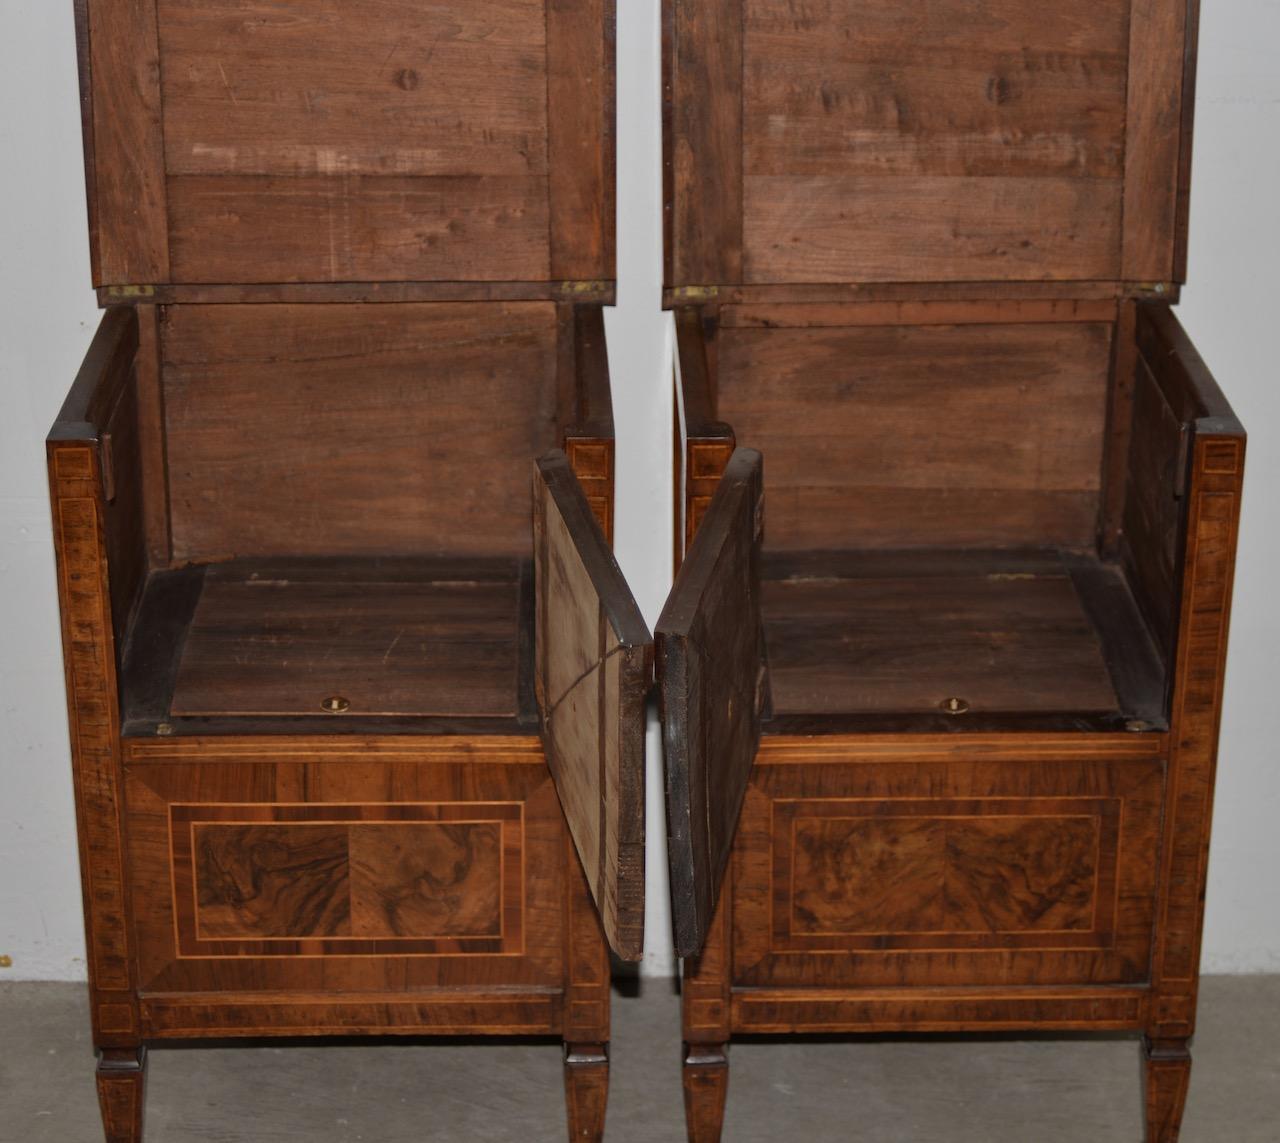 Georgian Pair of 19th Century Walnut Side Tables with Cabinets